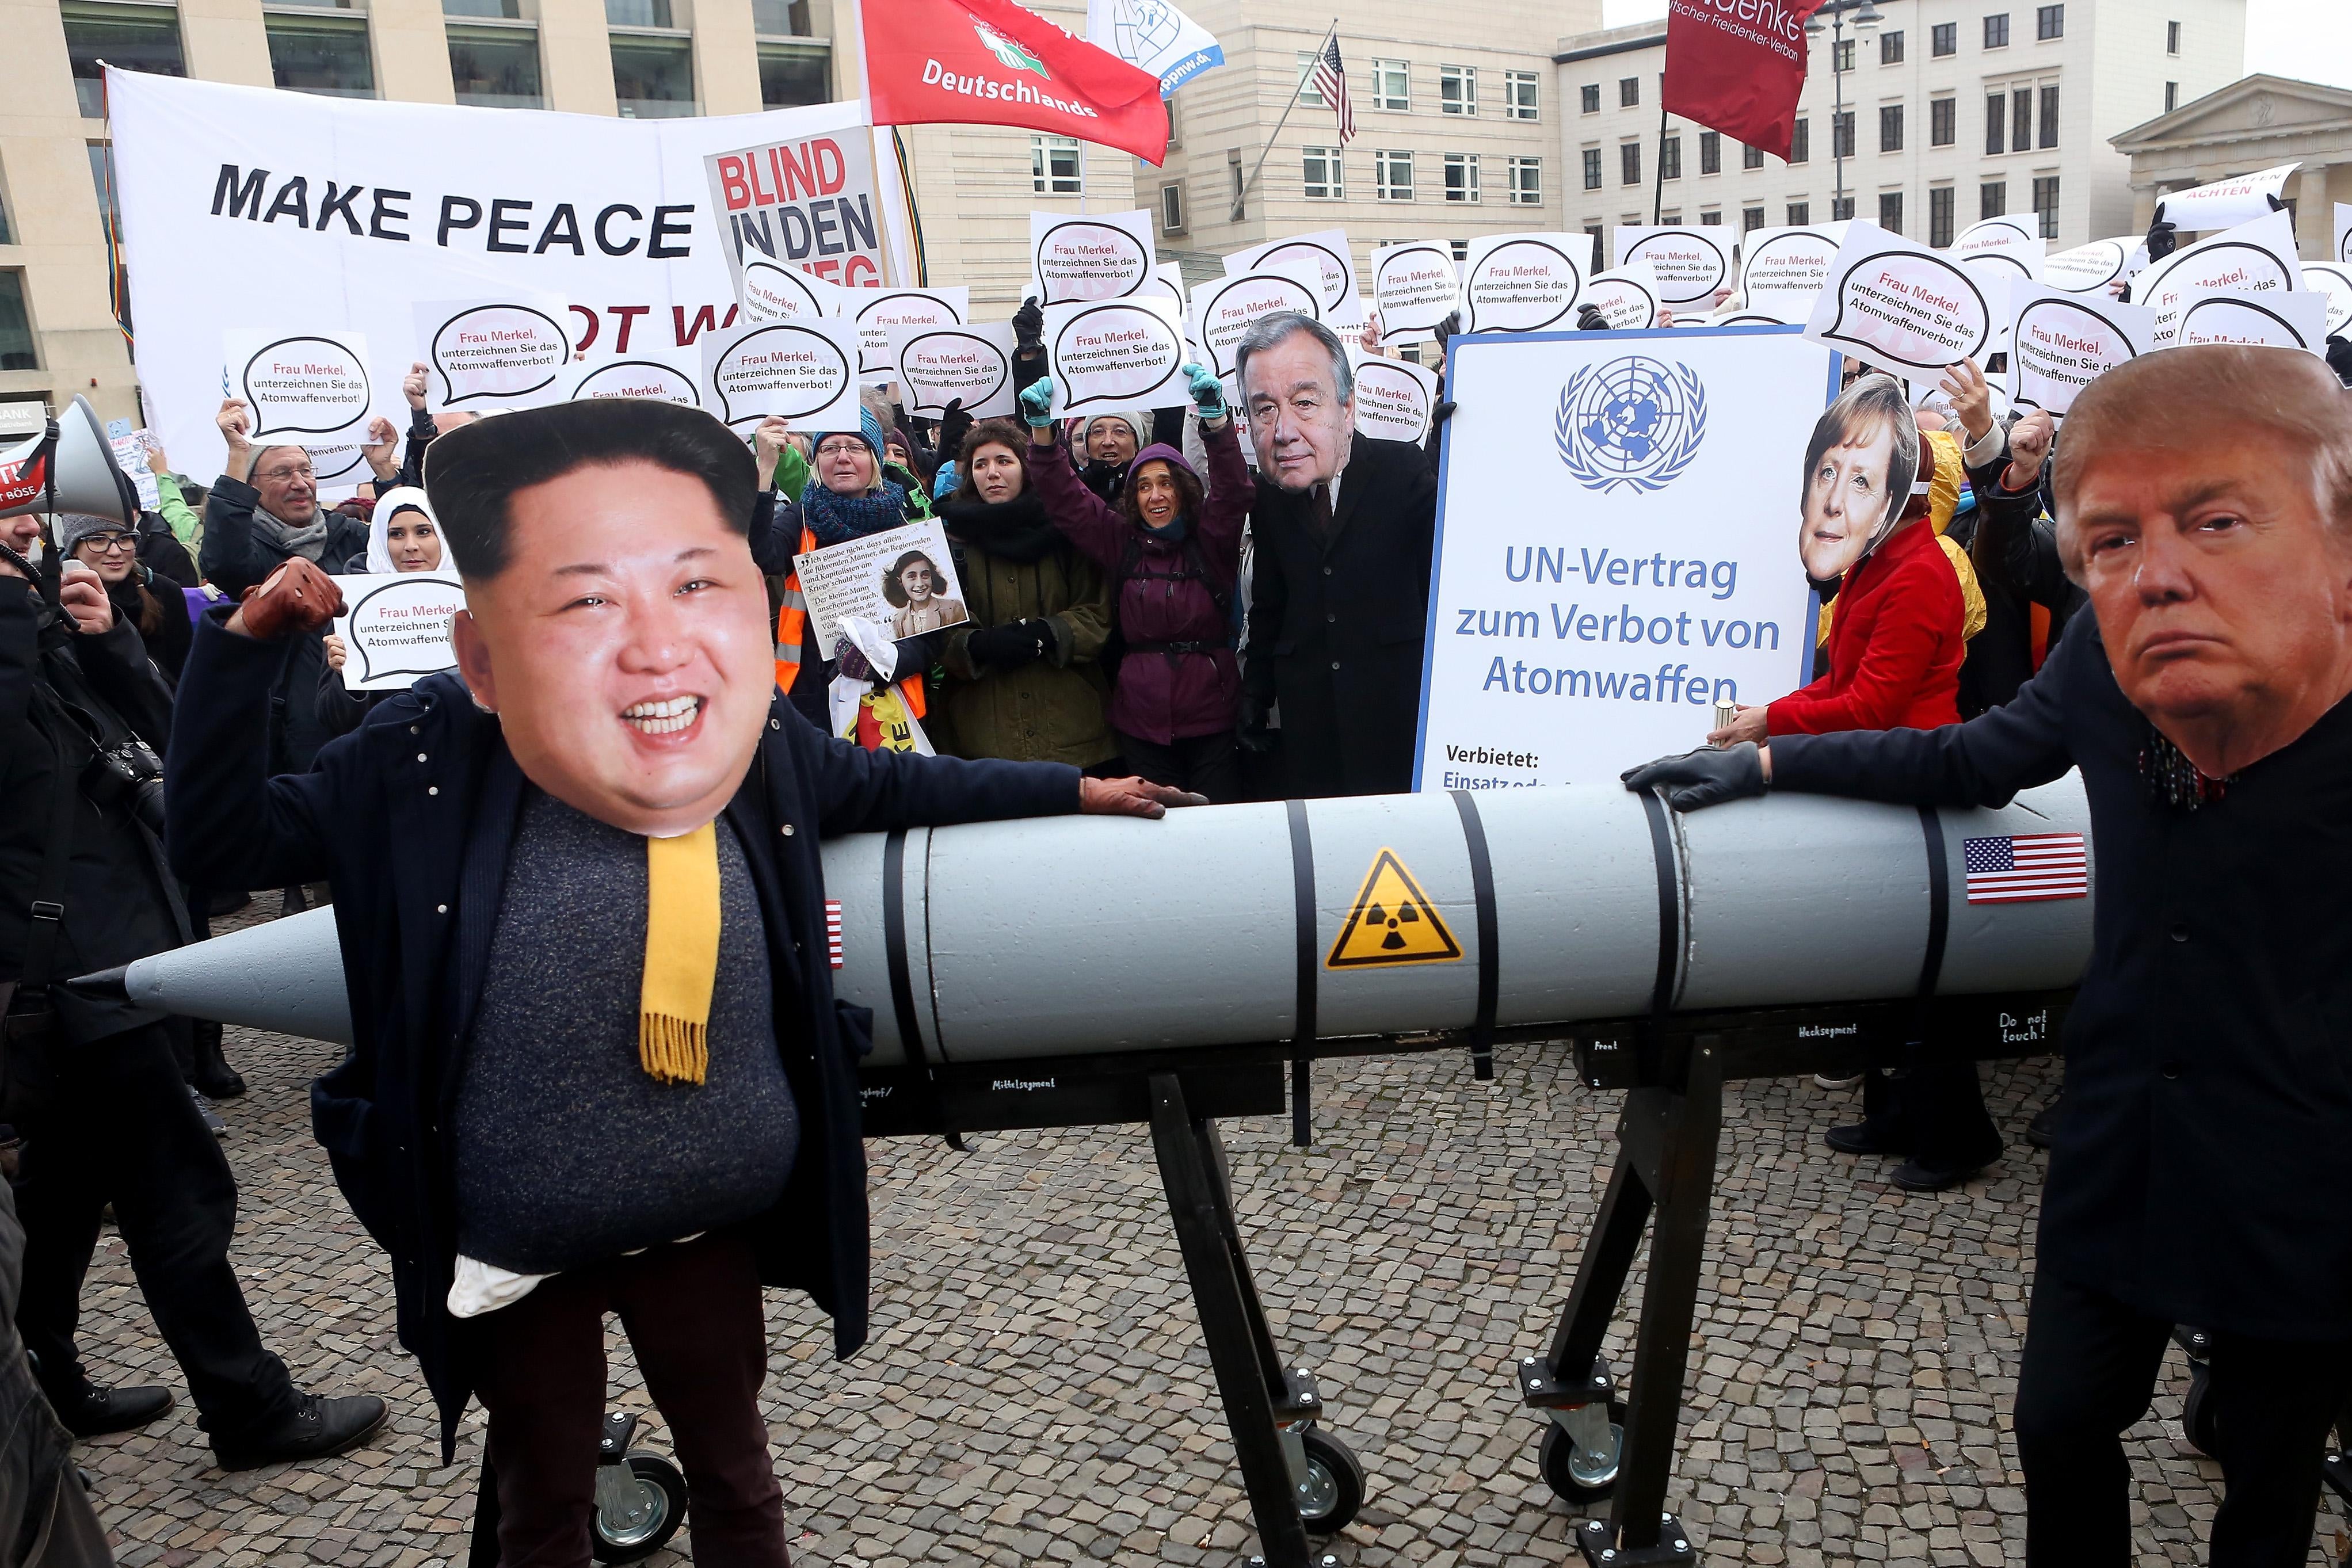 BERLIN, GERMANY - NOVEMBER 18:  An activist with a mask of Kim Jong-un, chairman of the Workers' Party of Korea and supreme leader of North Korea (L), and another with a mask of U.S. President Donald Trump, march with a model of a nuclear rocket during a demonstration against nuclear weapons on November 18, 2017 in Berlin, Germany. About 700 demonstrators protested against the current escalation of threat of nuclear attack between the United States of America and North Korea. The event was organized by peace advocacy organizations including the International Campaign to Abolish Nuclear Weapons (ICAN), which won the Nobel Prize for Peace this year.  (Photo by Adam Berry/Getty Images)